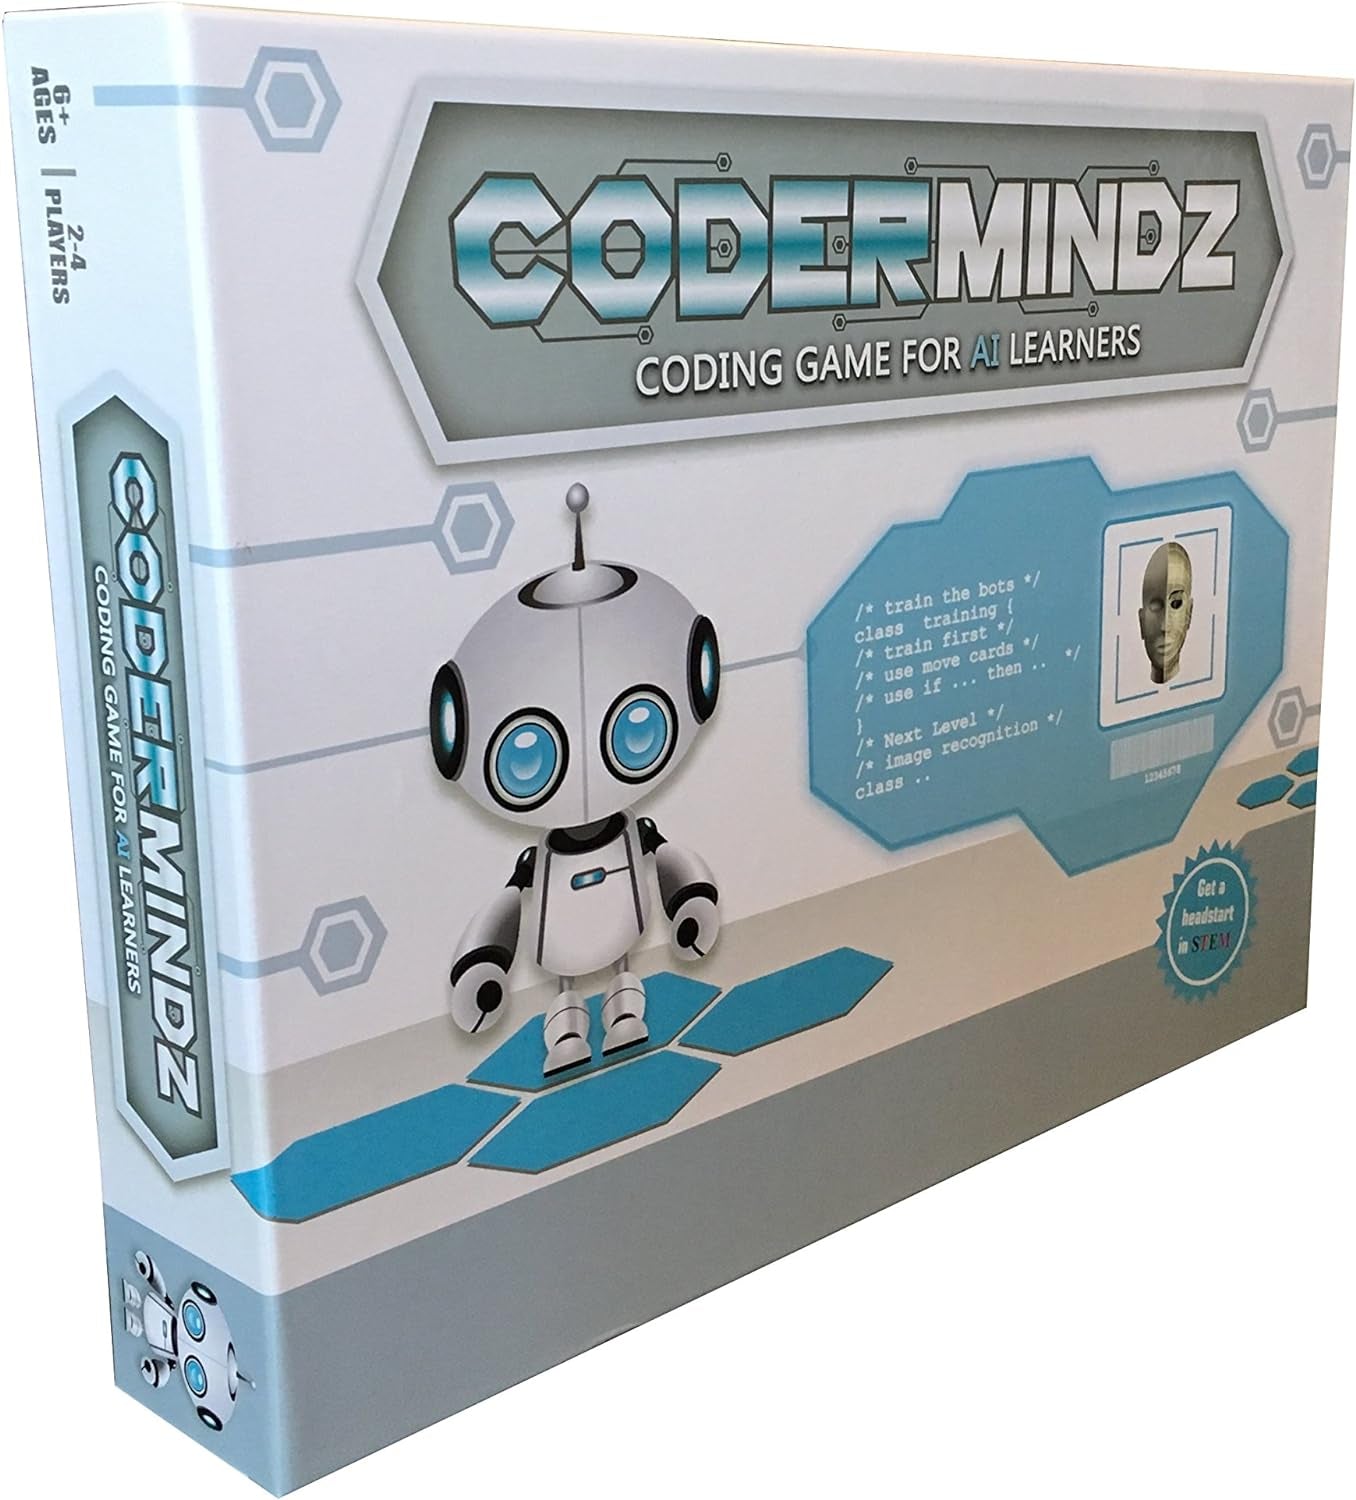 Game for AI Learners! NBC Featured: First Ever Board Game for Boys and Girls Age 6+. Teaches Artificial Intelligence and Computer Programming through Fun Robot and Neural Adventure!